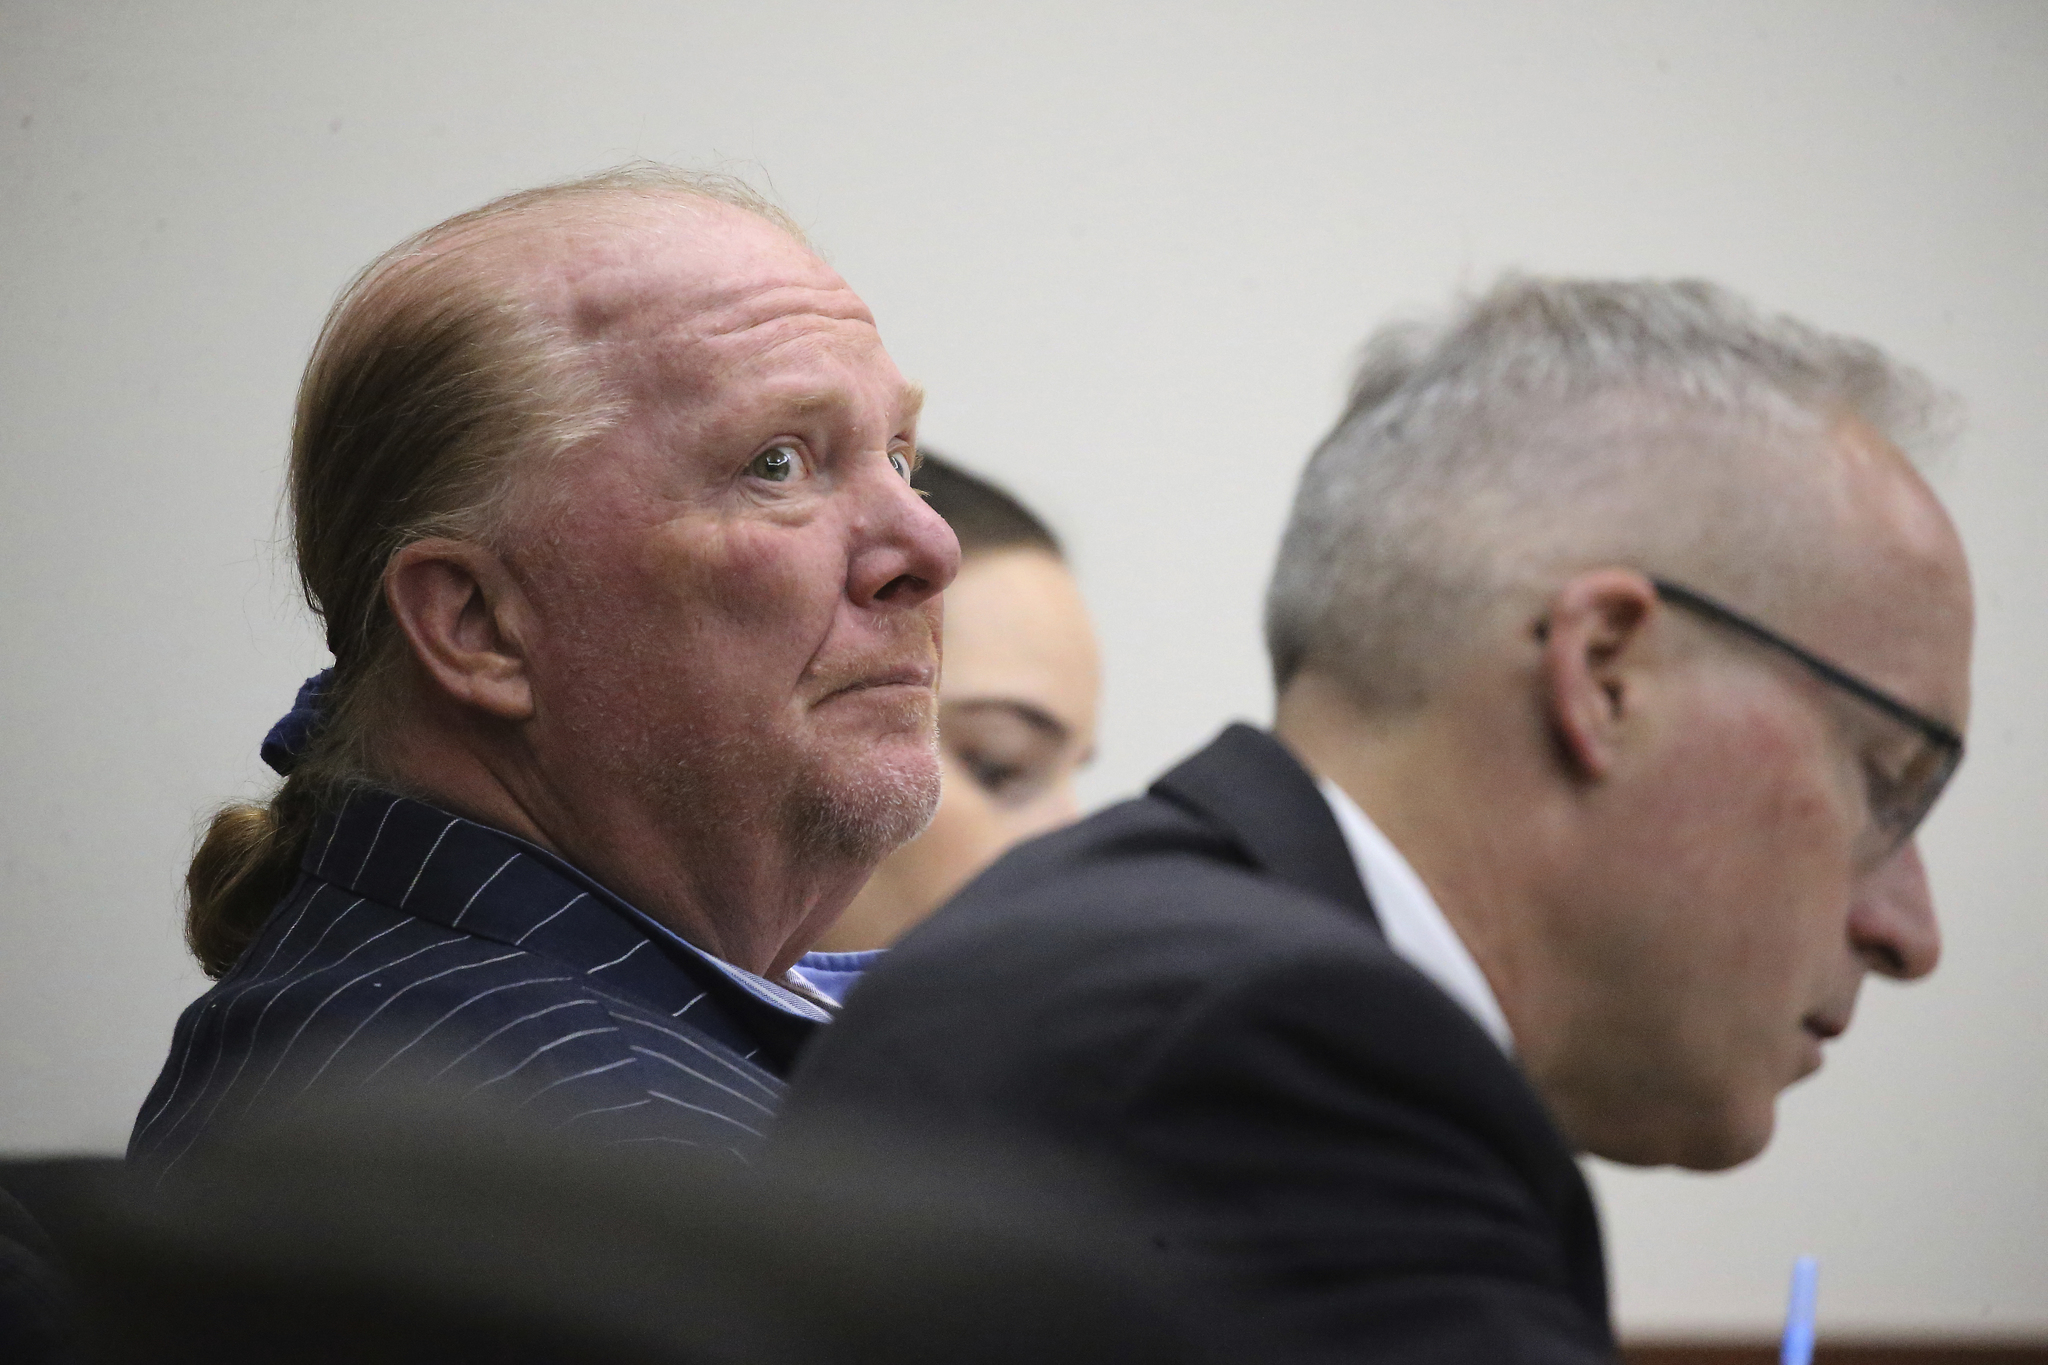 Chef Mario Batali acquitted in sexual misconduct trial